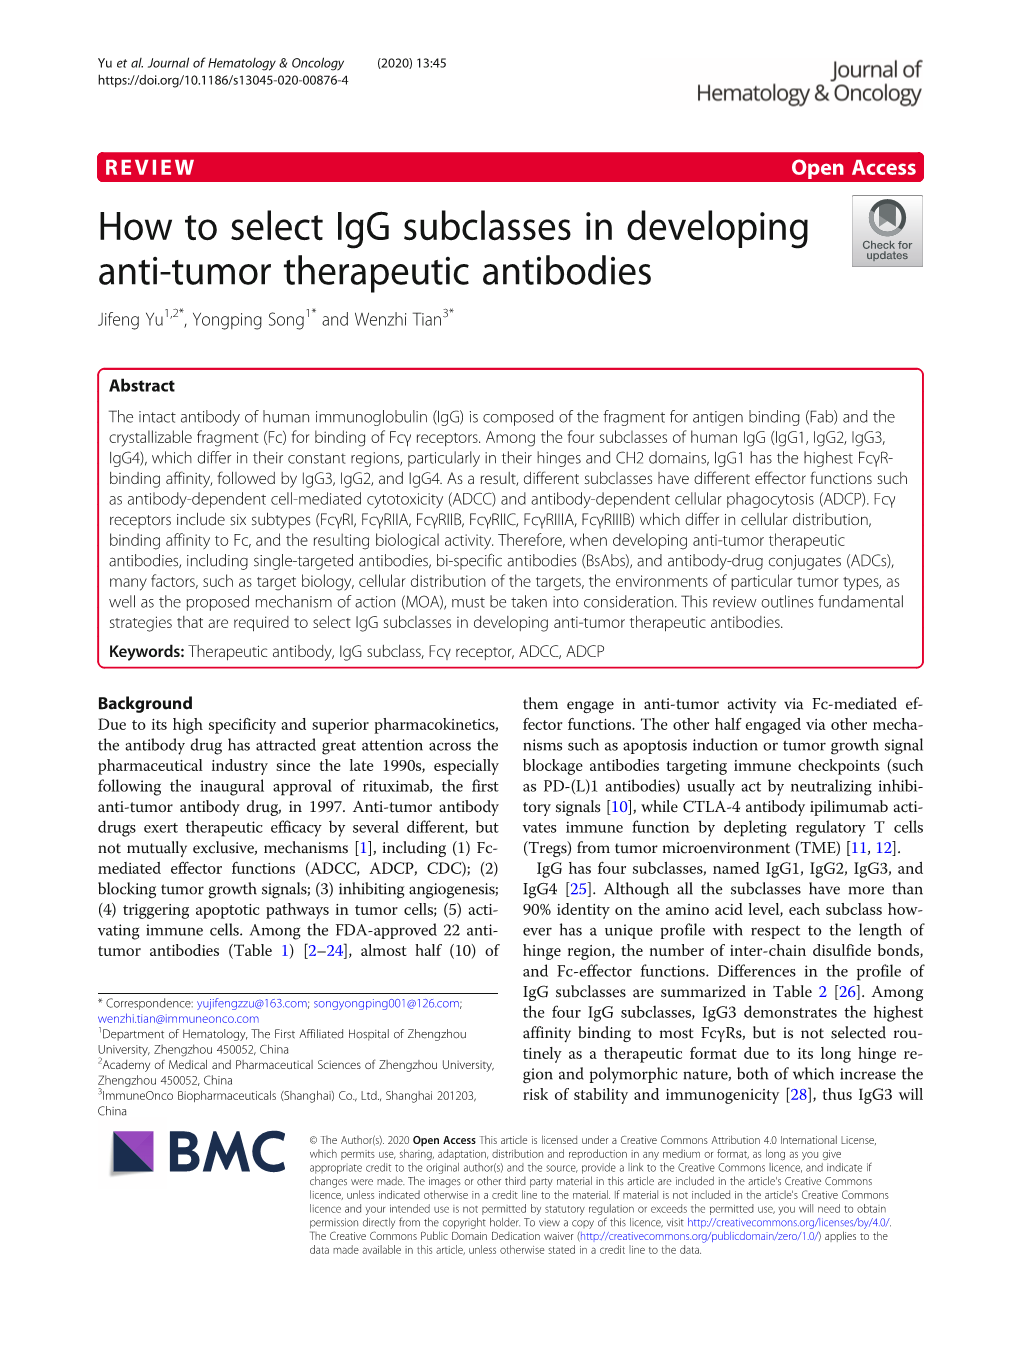 How to Select Igg Subclasses in Developing Anti-Tumor Therapeutic Antibodies Jifeng Yu1,2*, Yongping Song1* and Wenzhi Tian3*